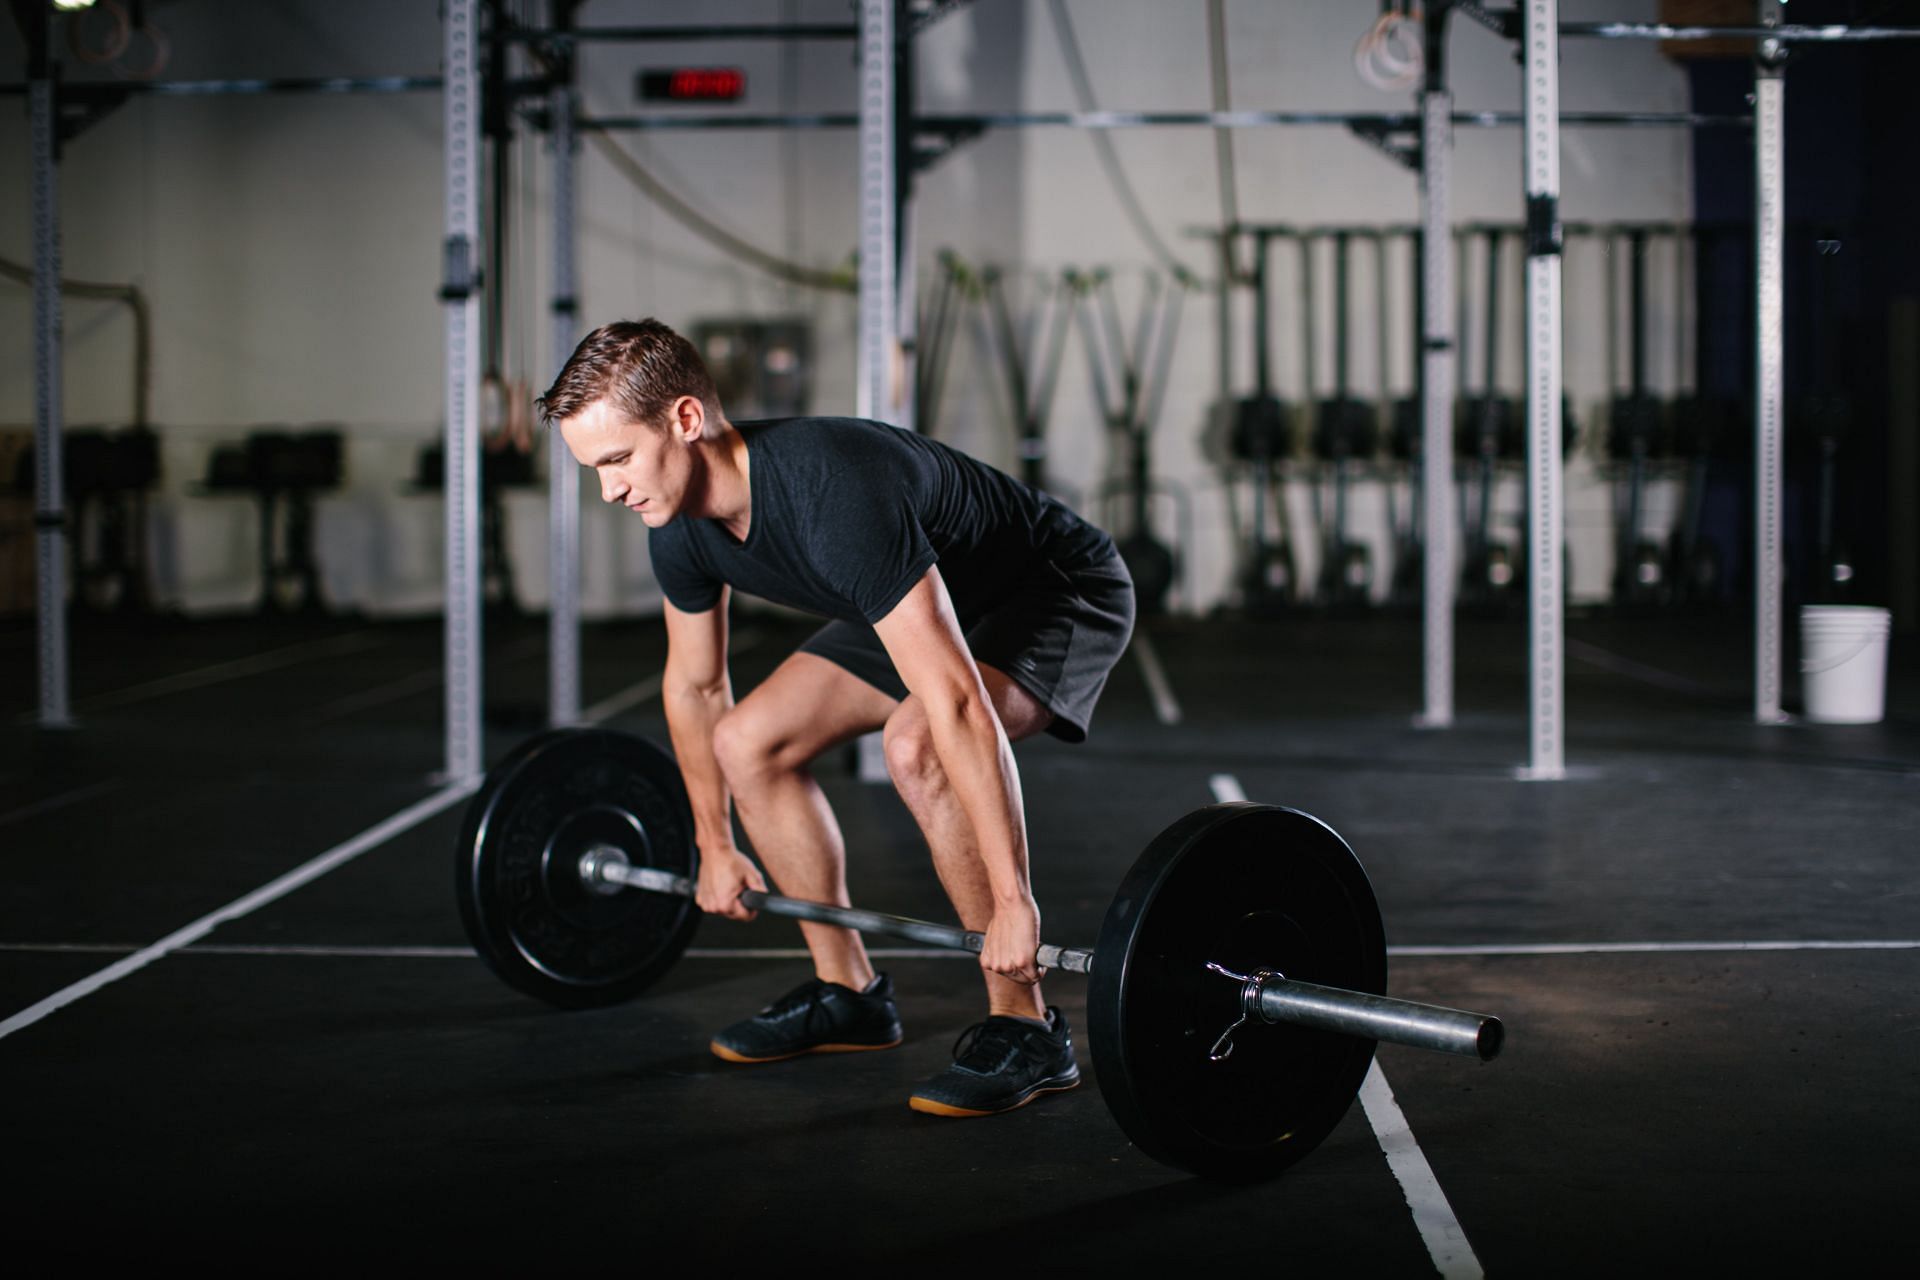 Strength, increased muscular growth, fat loss, and power can all be obtained with barbell strength training. (Image via Unsplash/ Mariah Krafft)